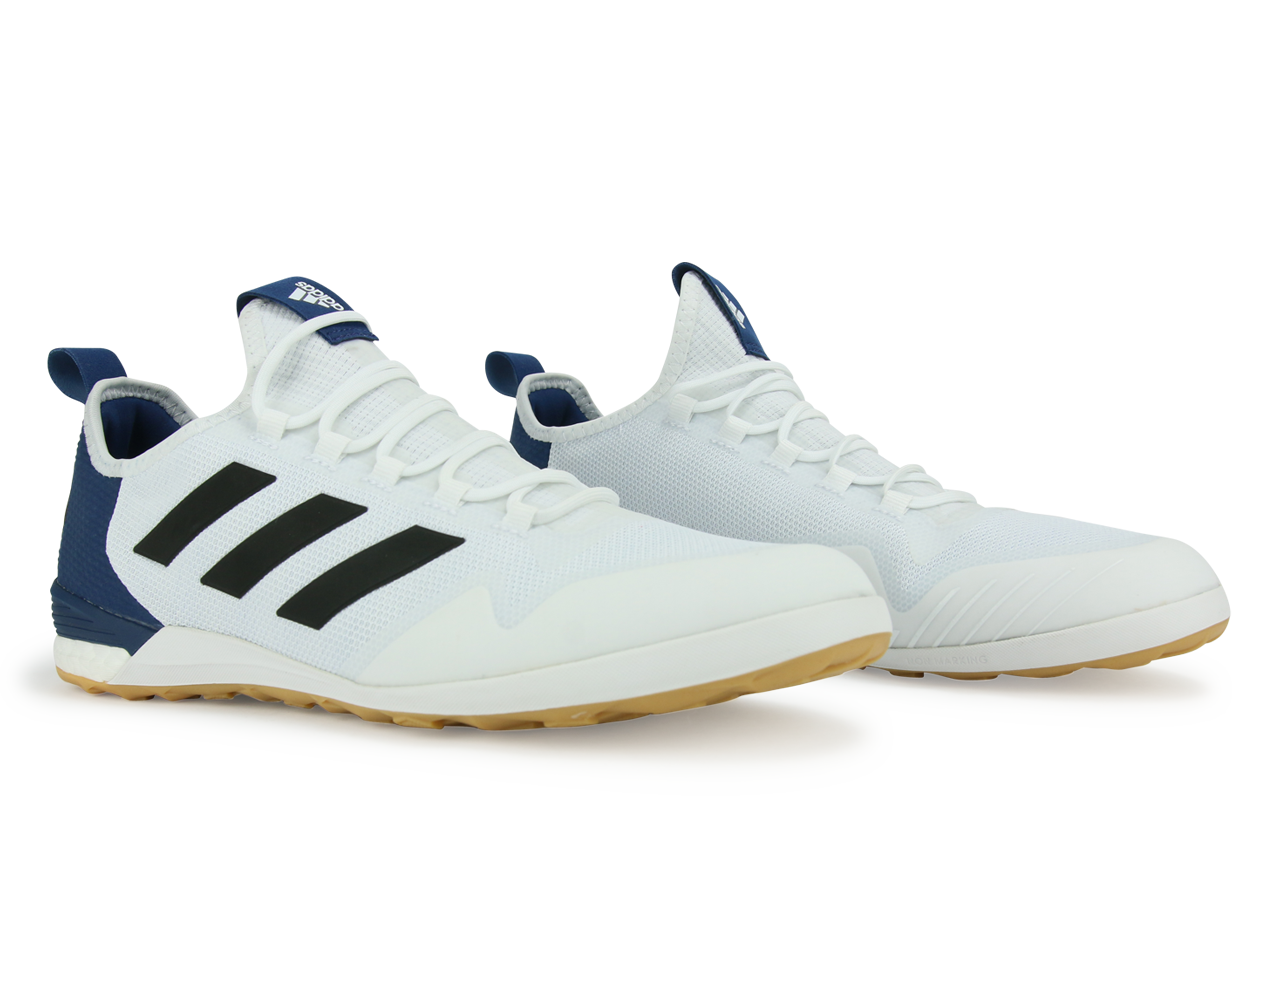 adidas Men's ACE Tango 17.1 Indoor Soccer Shoes Running White/Black